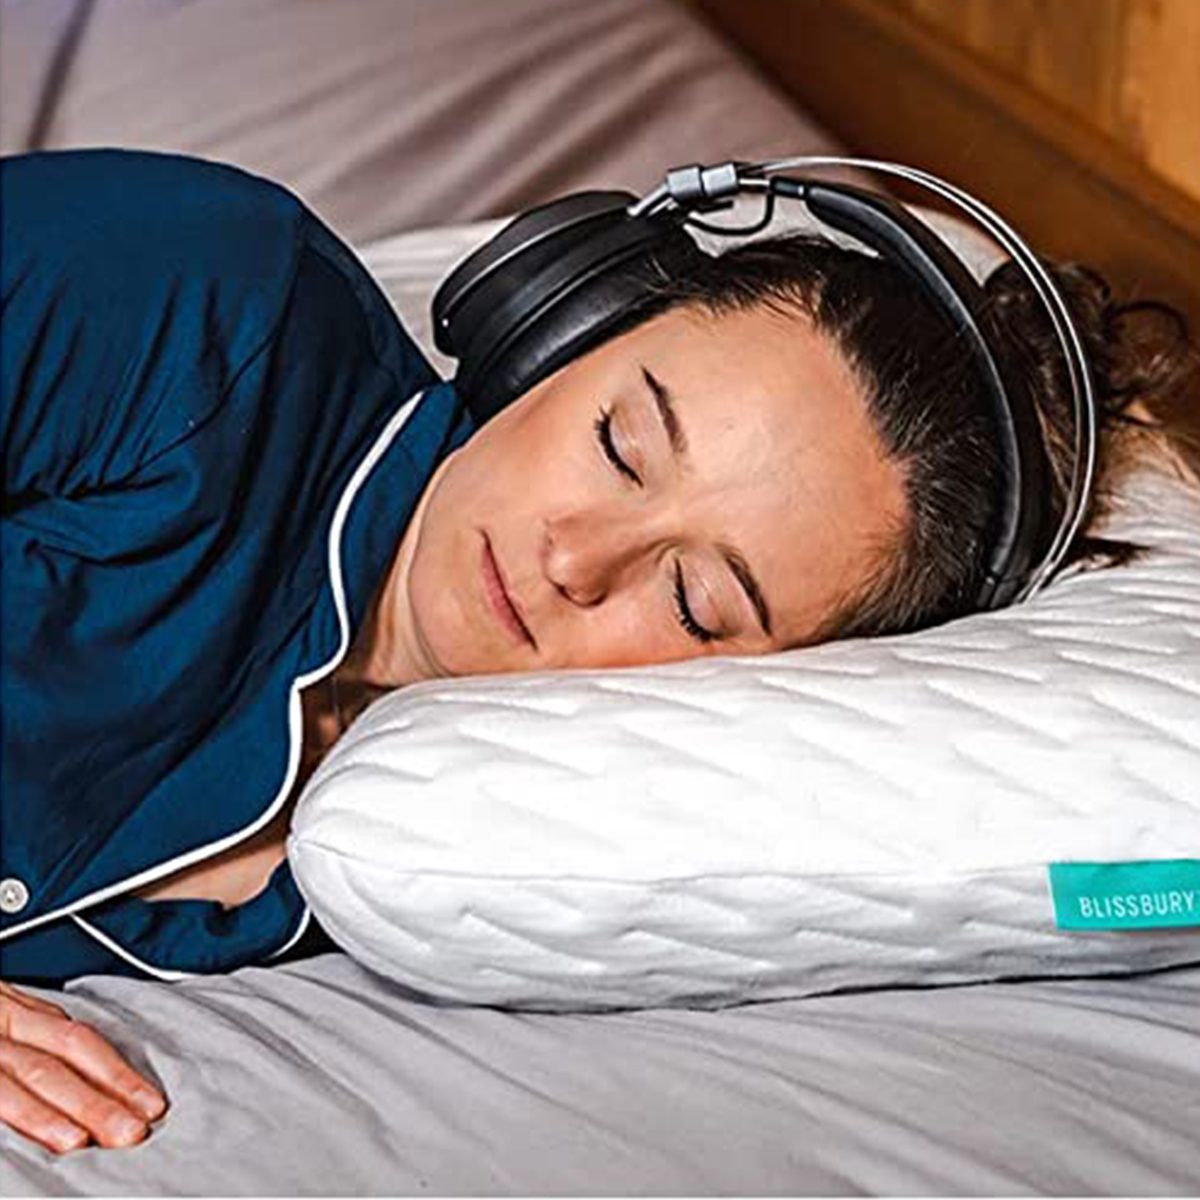 The Weird Little Pillow That Helps Us Sleep More Comfortably